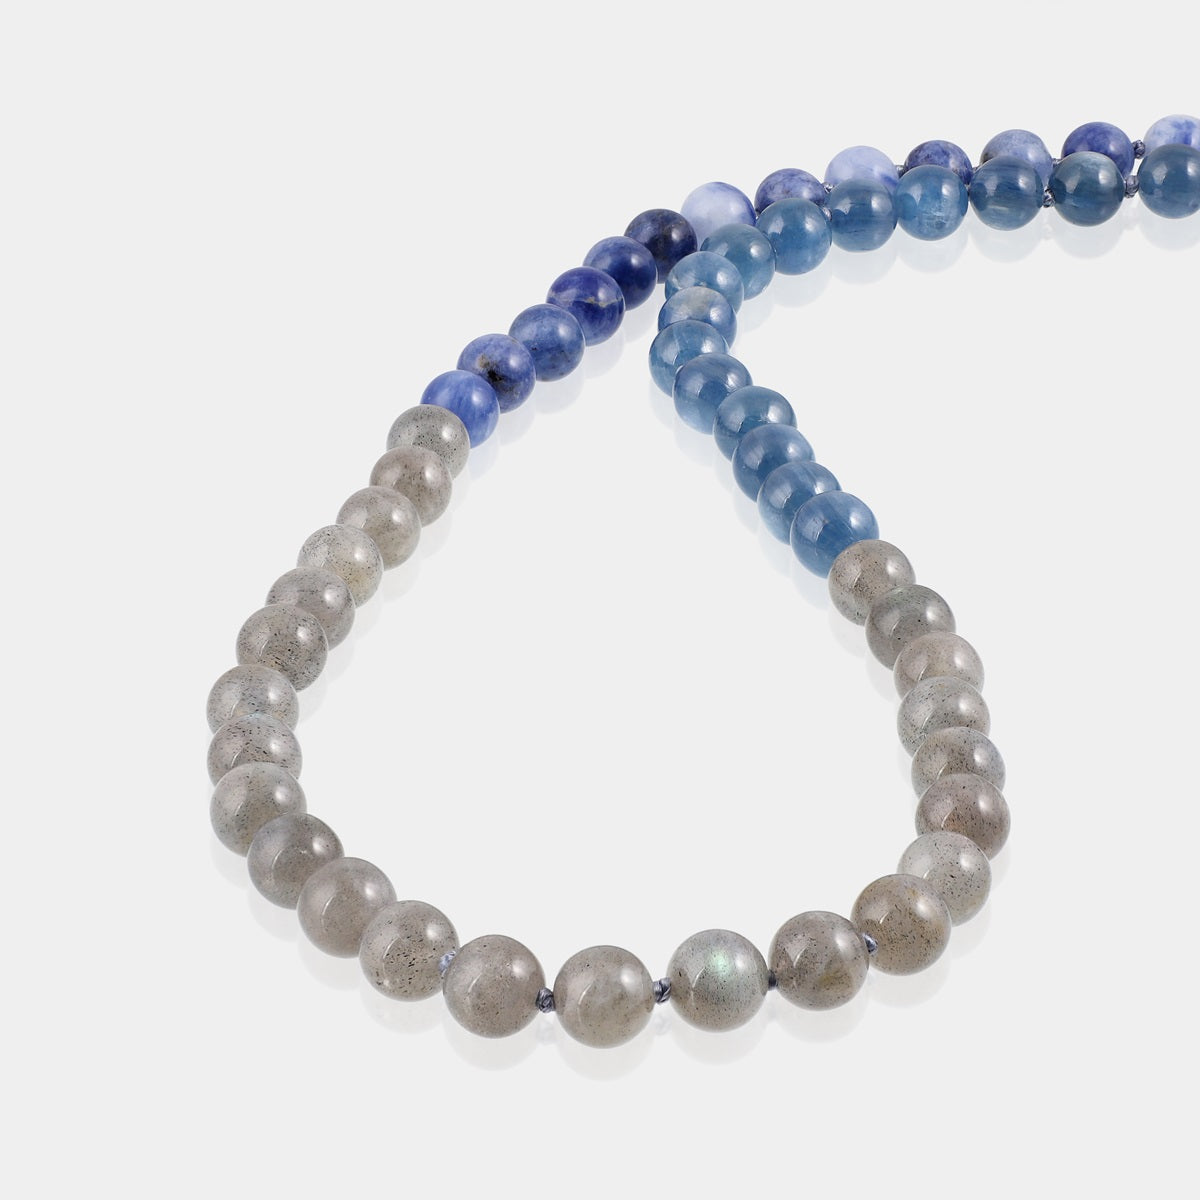 handcrafted spiritual accessories featuring Labradorite, Kyanite, and Sodalite gemstones, designed to elevate your meditation experience.